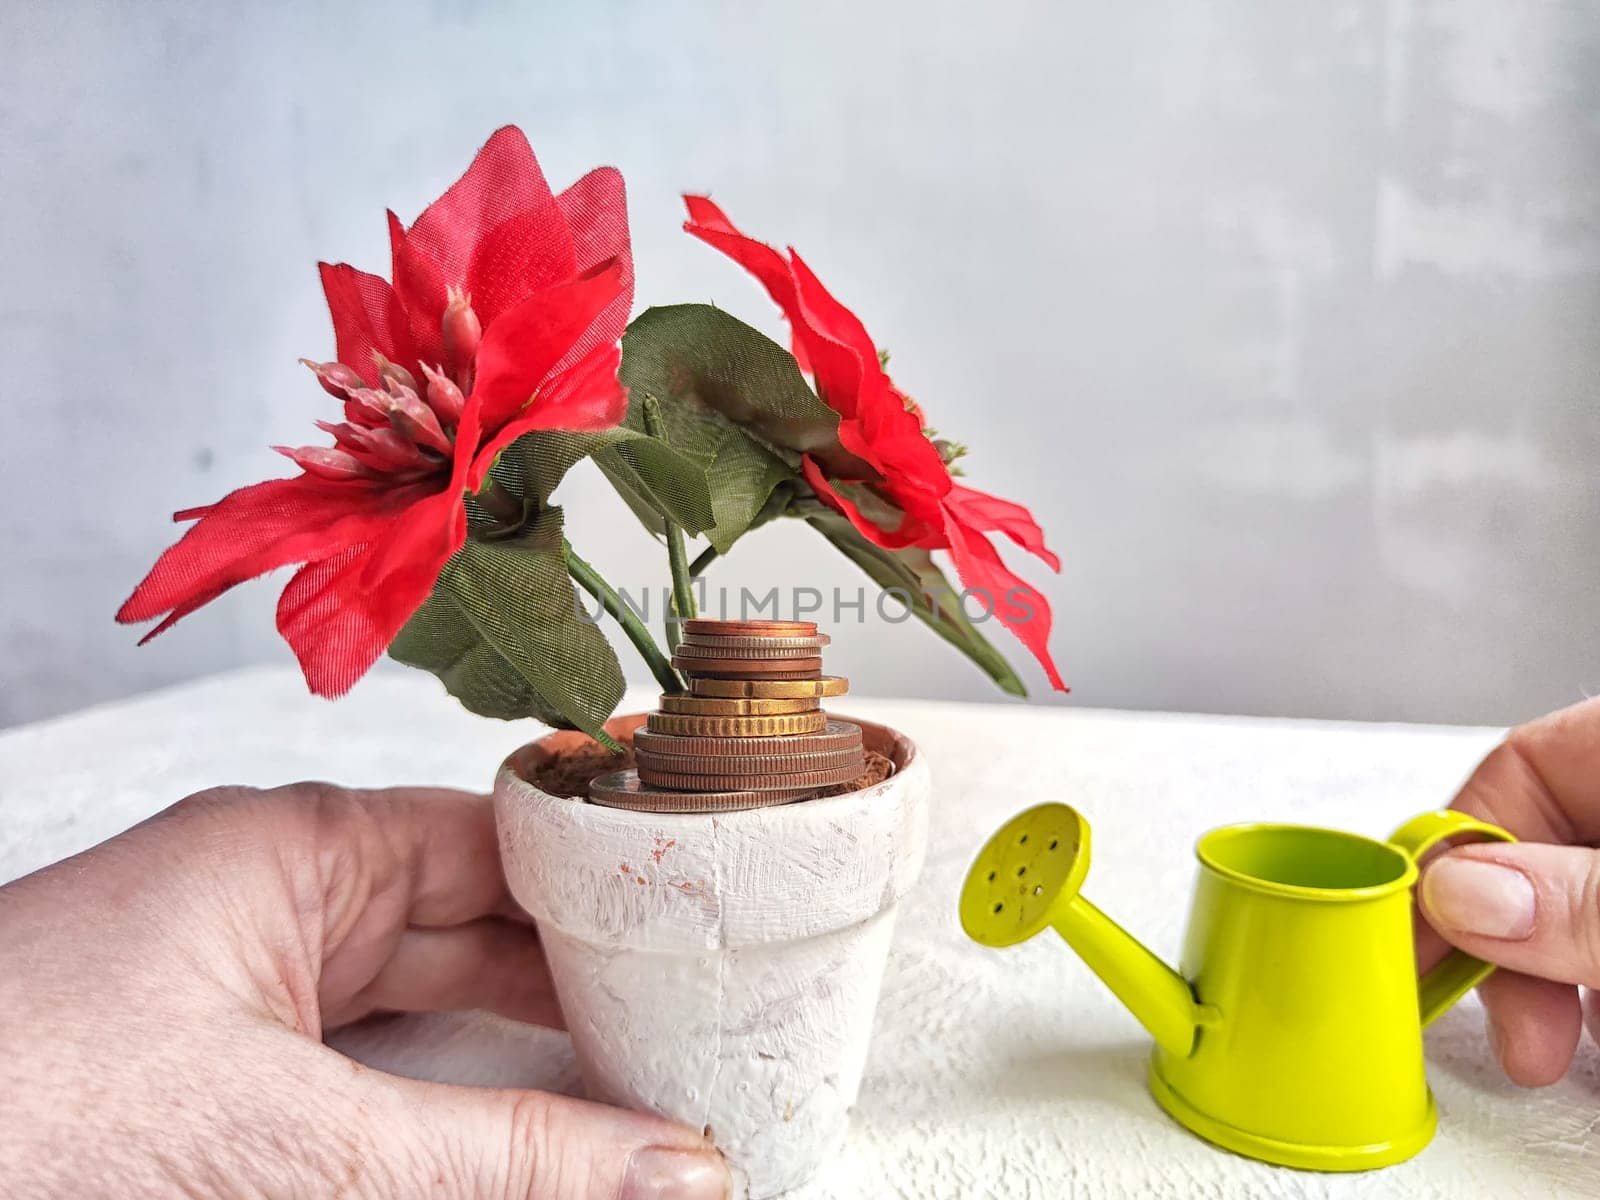 A hand holds a small watering can, tilting it towards a blooming red flower growing out of a pot filled with stacked coins, suggesting the nurturing of financial growth or investment